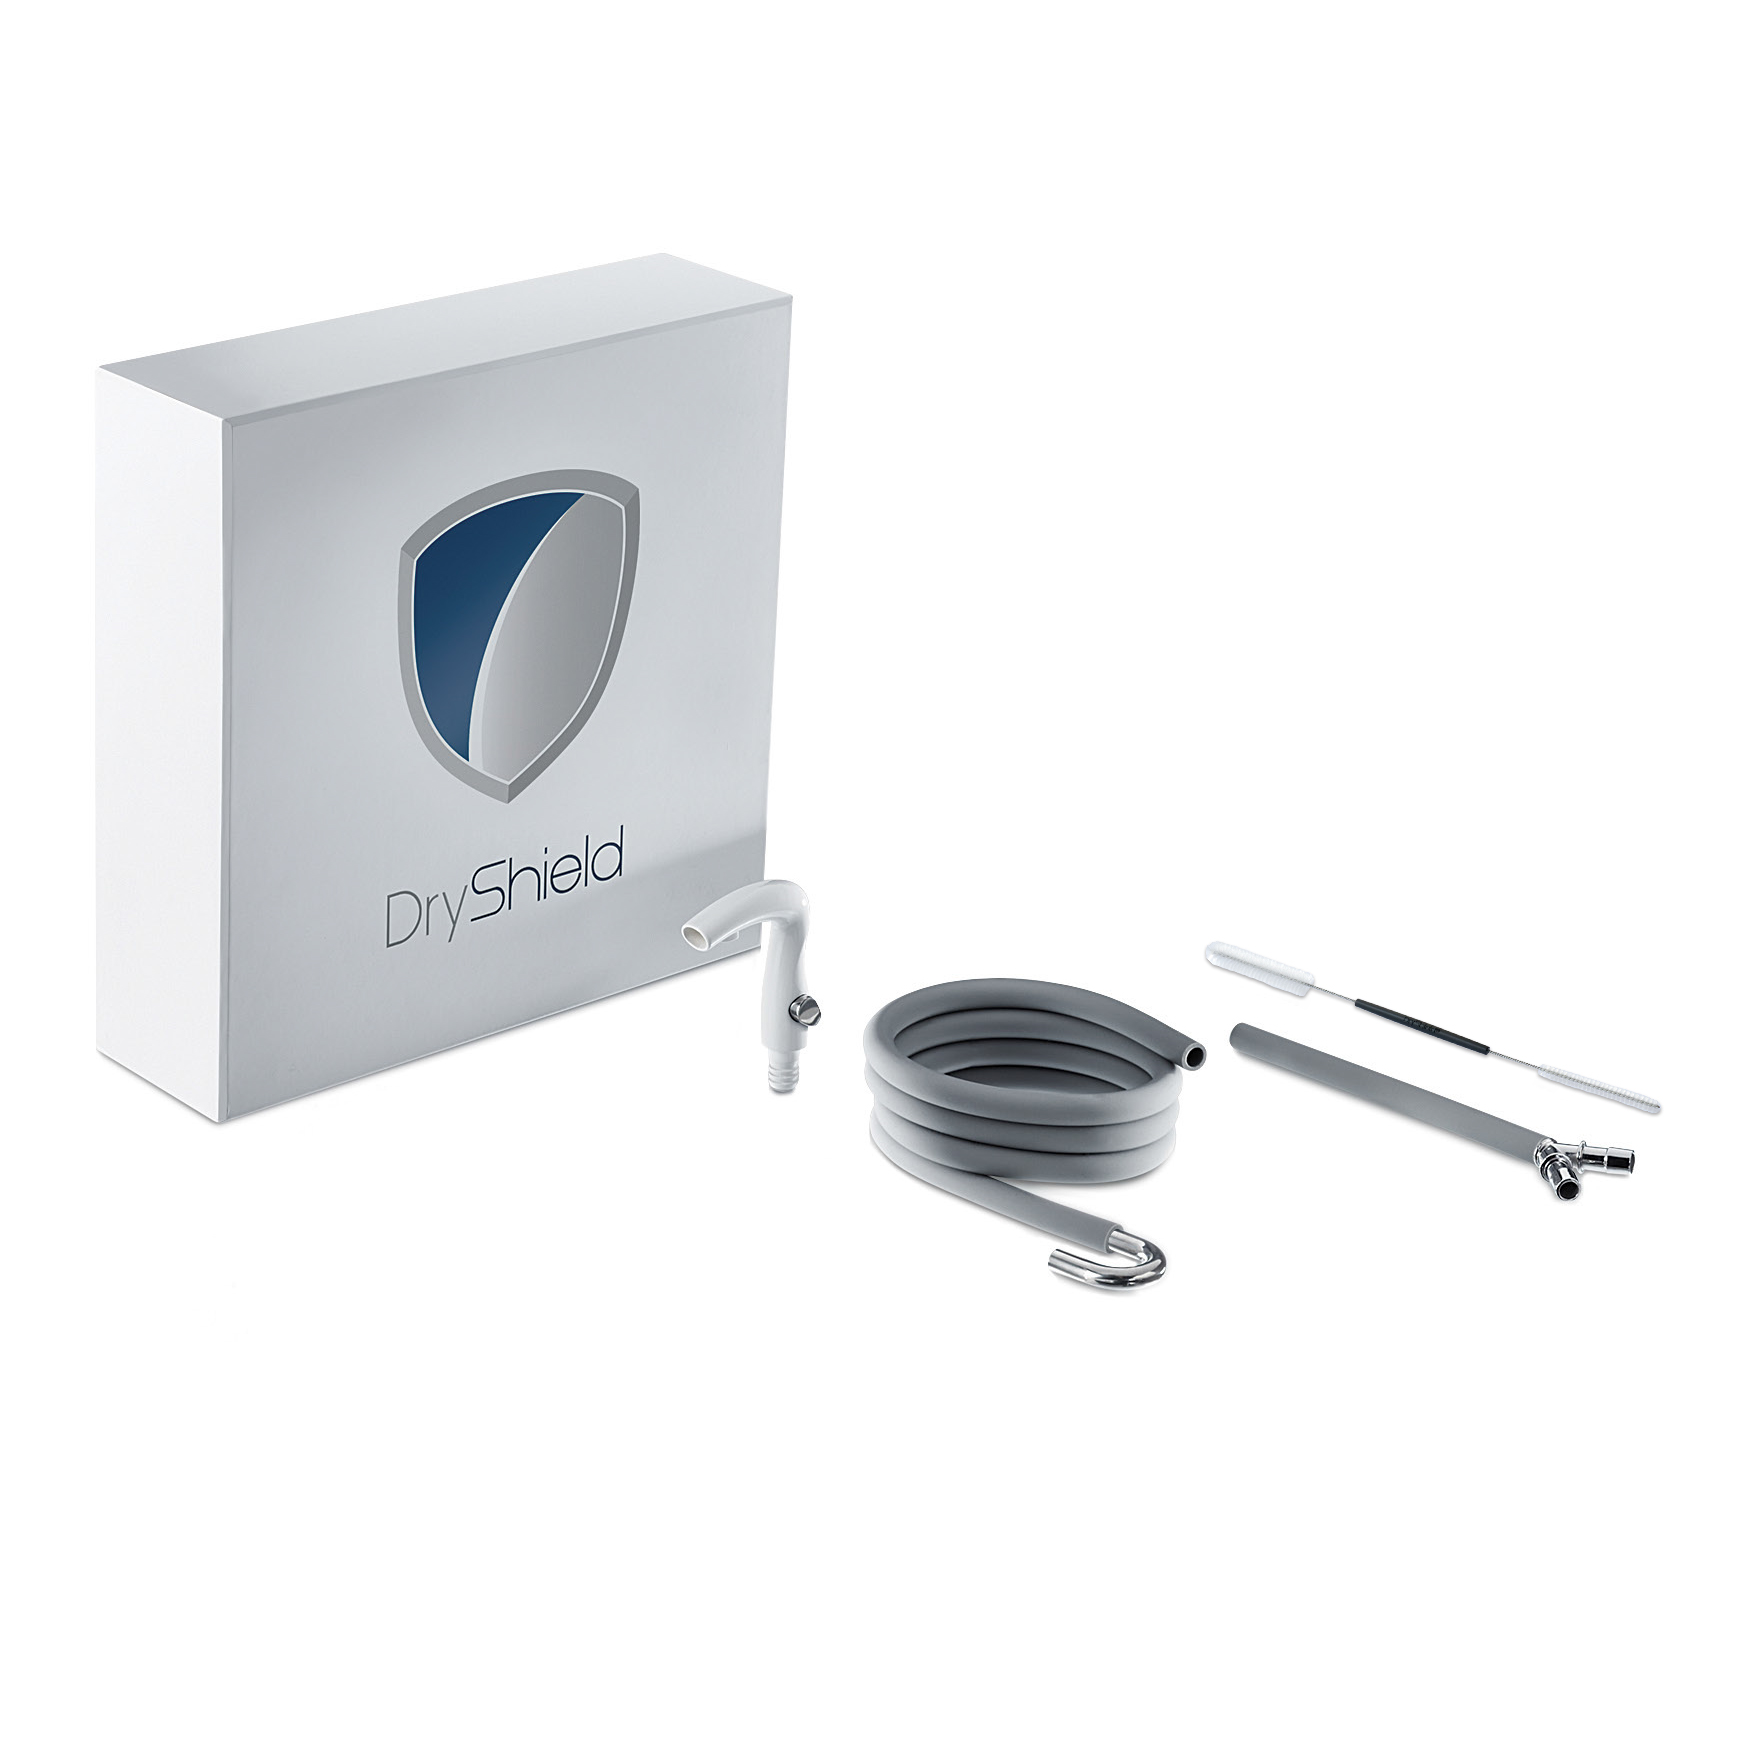 DryShield Isolation System for Dental Practices